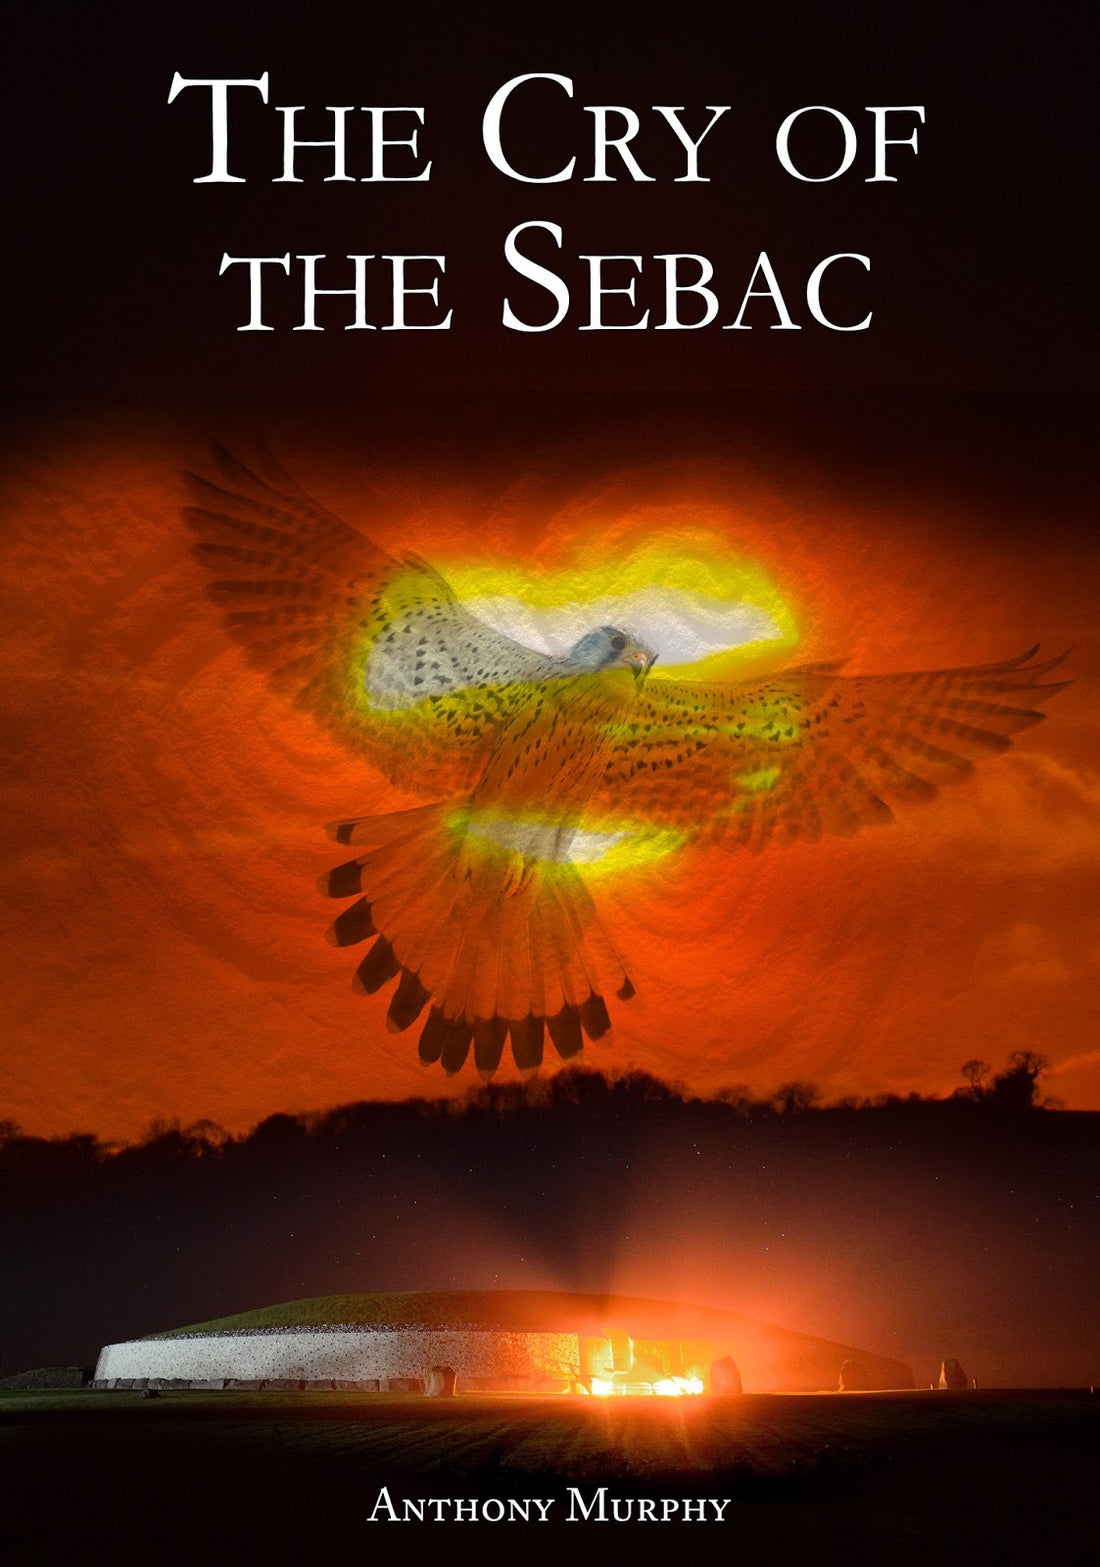 My new novel 'The Cry of the Sebac' has just been published for Amazon Kindle